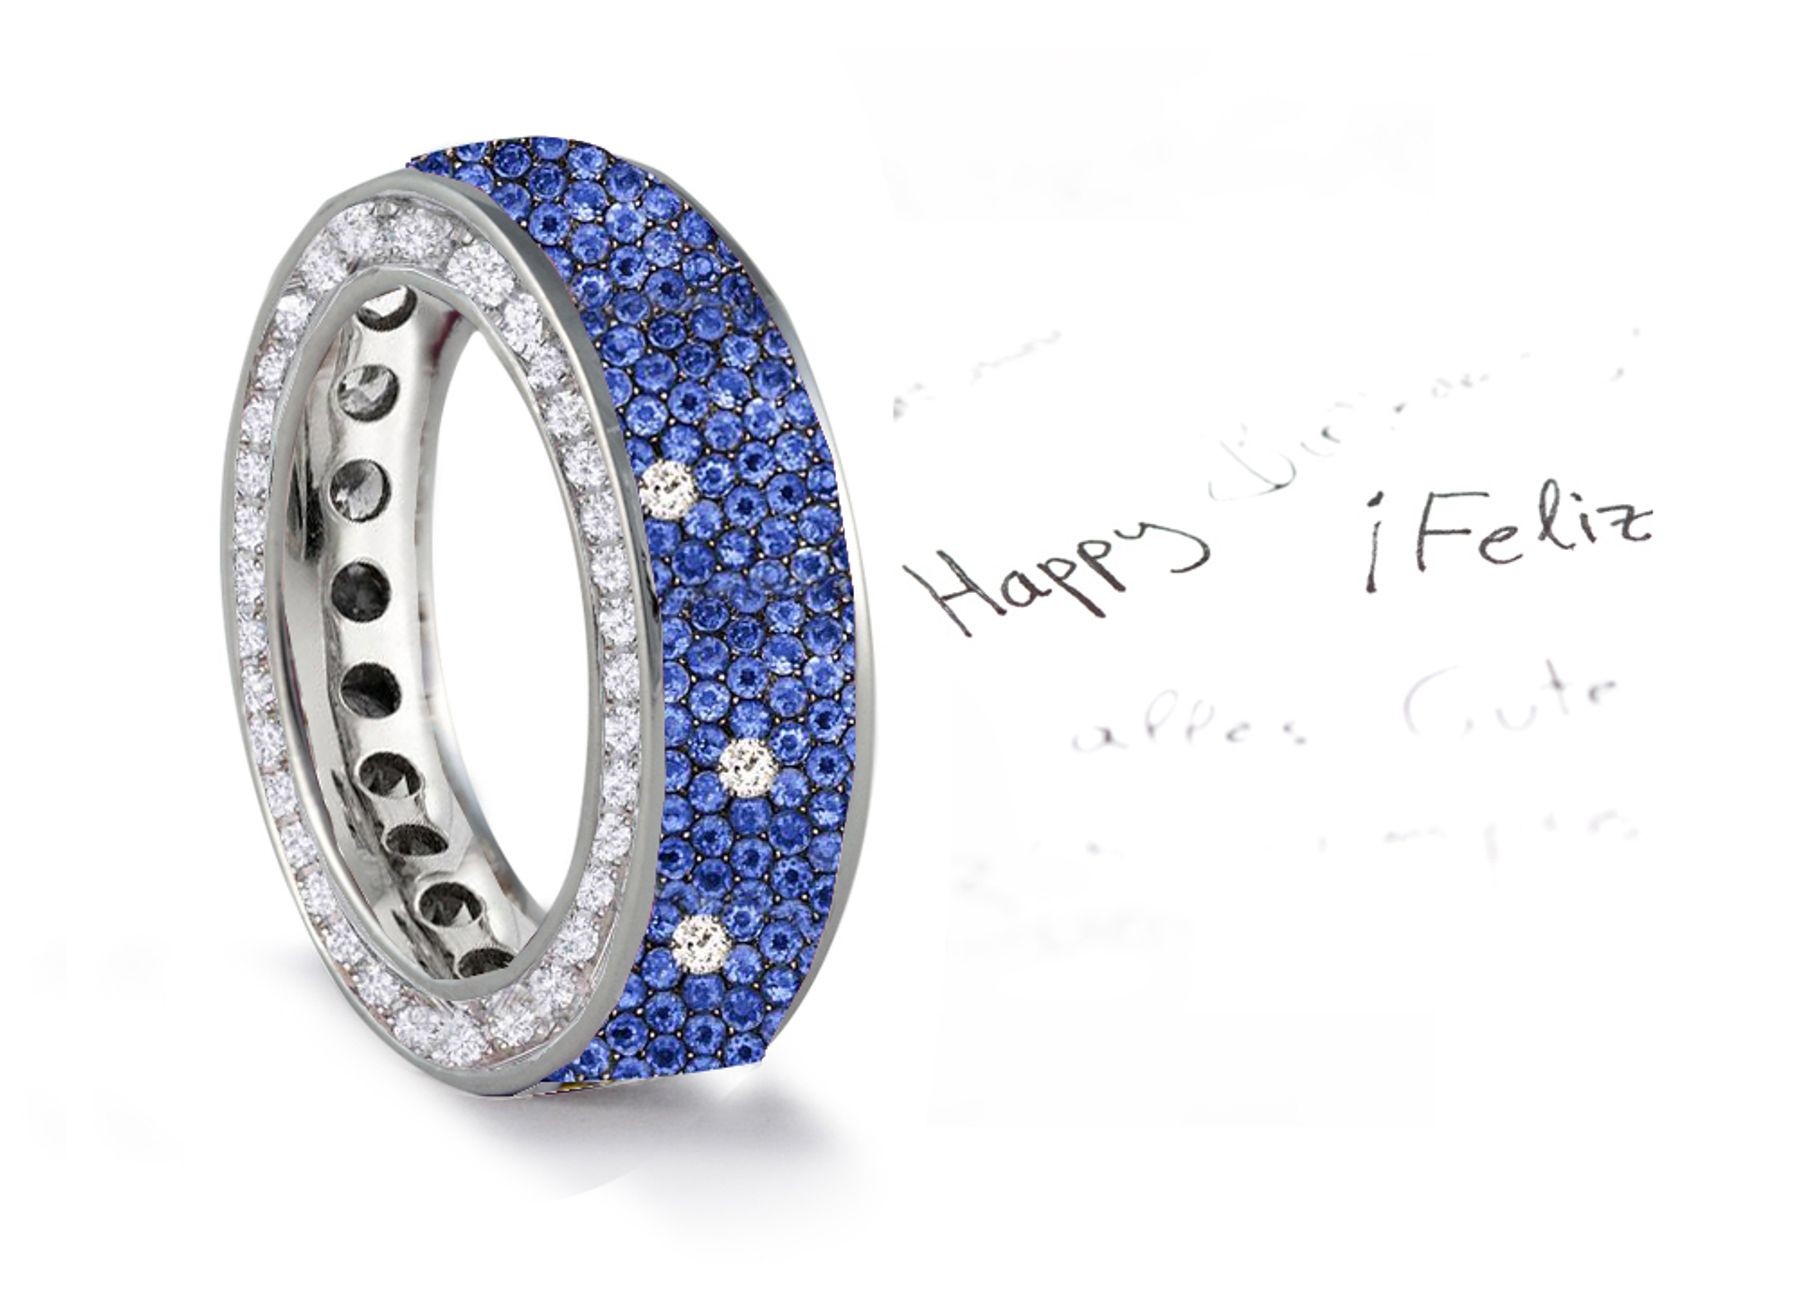 Made to Order French pave Set Brilliant Cut Round Diamonds & Blue Sapphires Eternity Rings & Bands